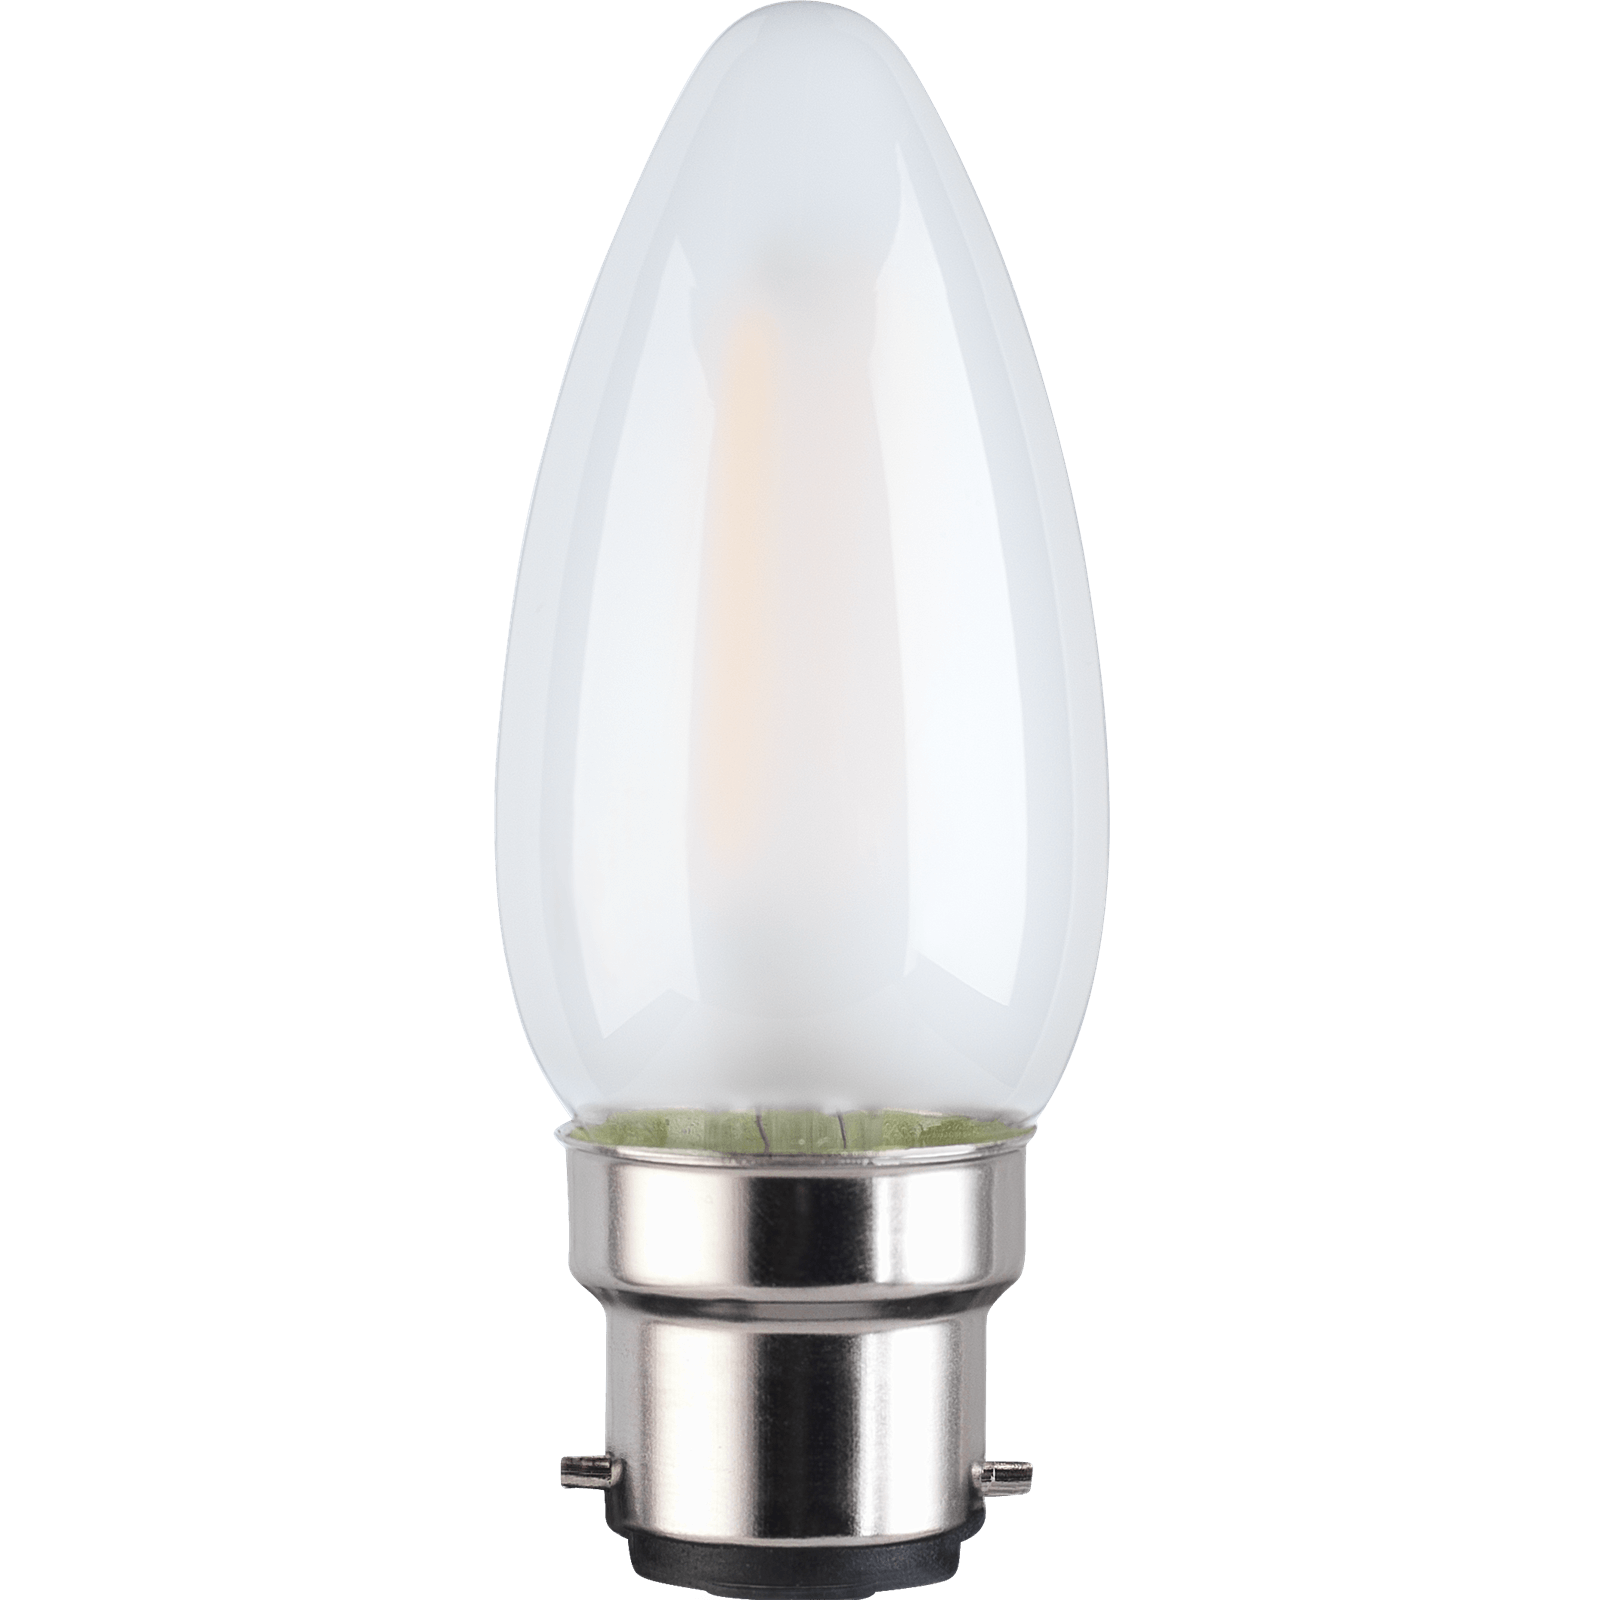 Photo of Tcp Filament Candle Coat 40w Bc Cool Dimmable Light Bulb